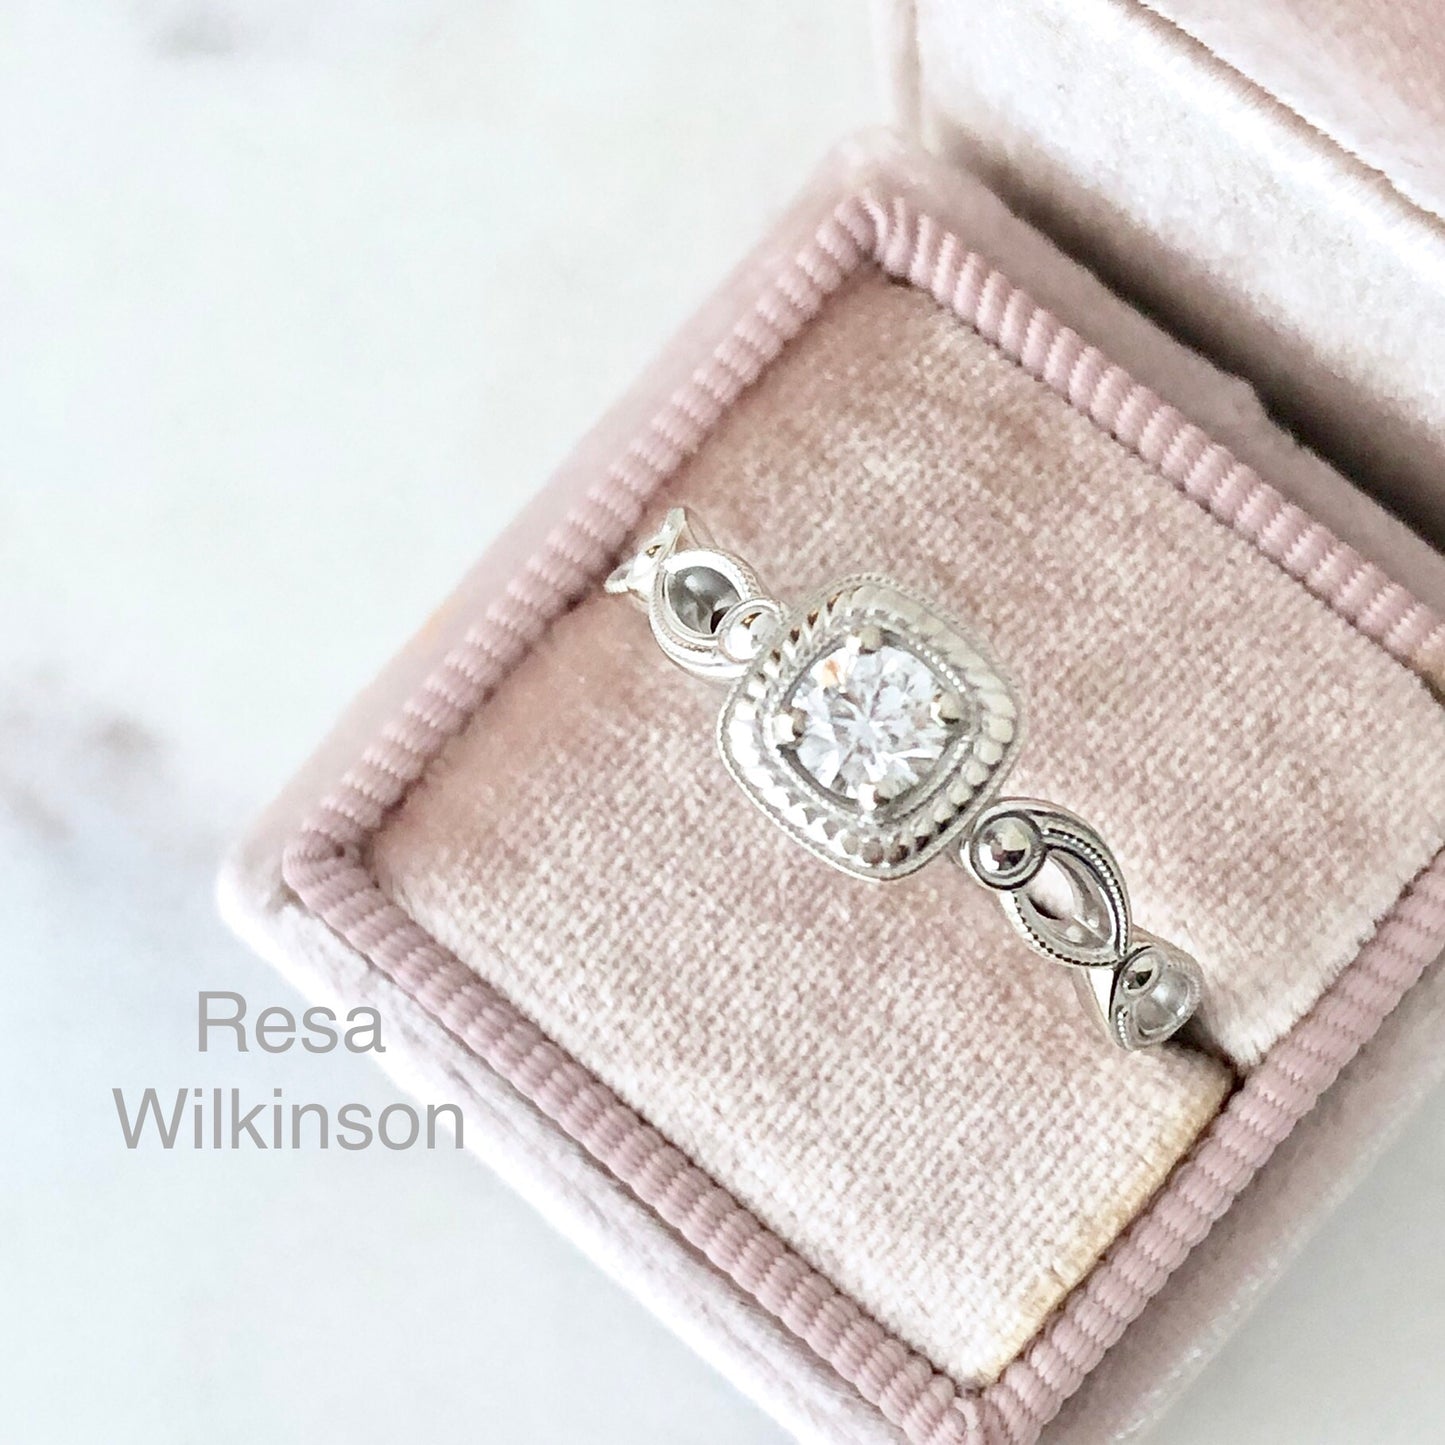 Vintage Inspired Natural Diamond Engagement Ring AGS Certified